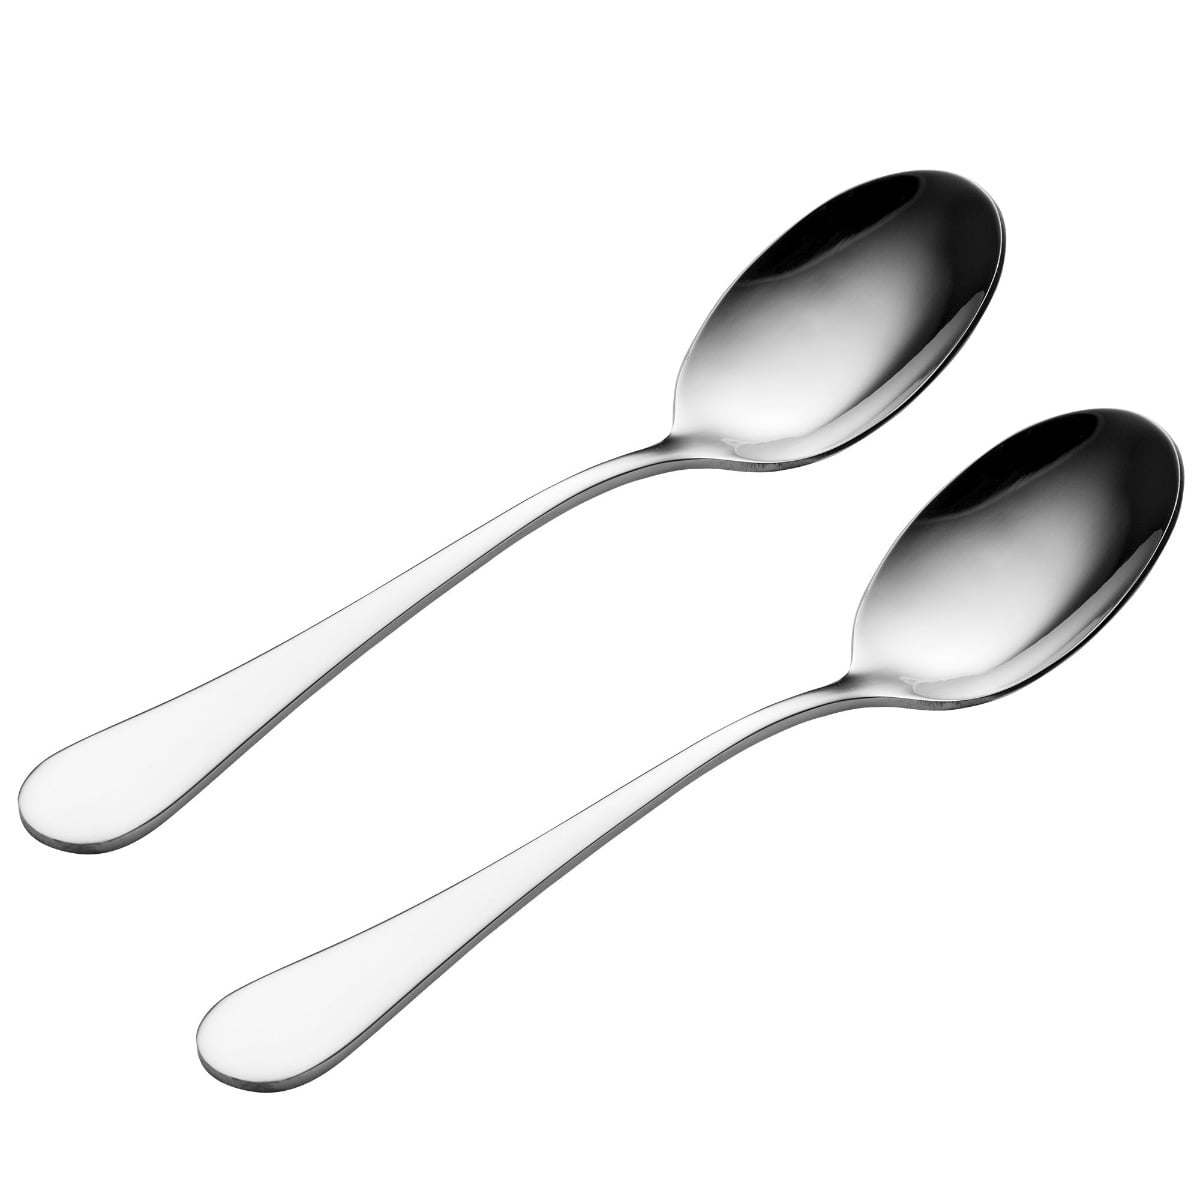 Large Serving Spoon Stainless Steel Catering Cutlery Kitchen Utensils 10" 25cm 